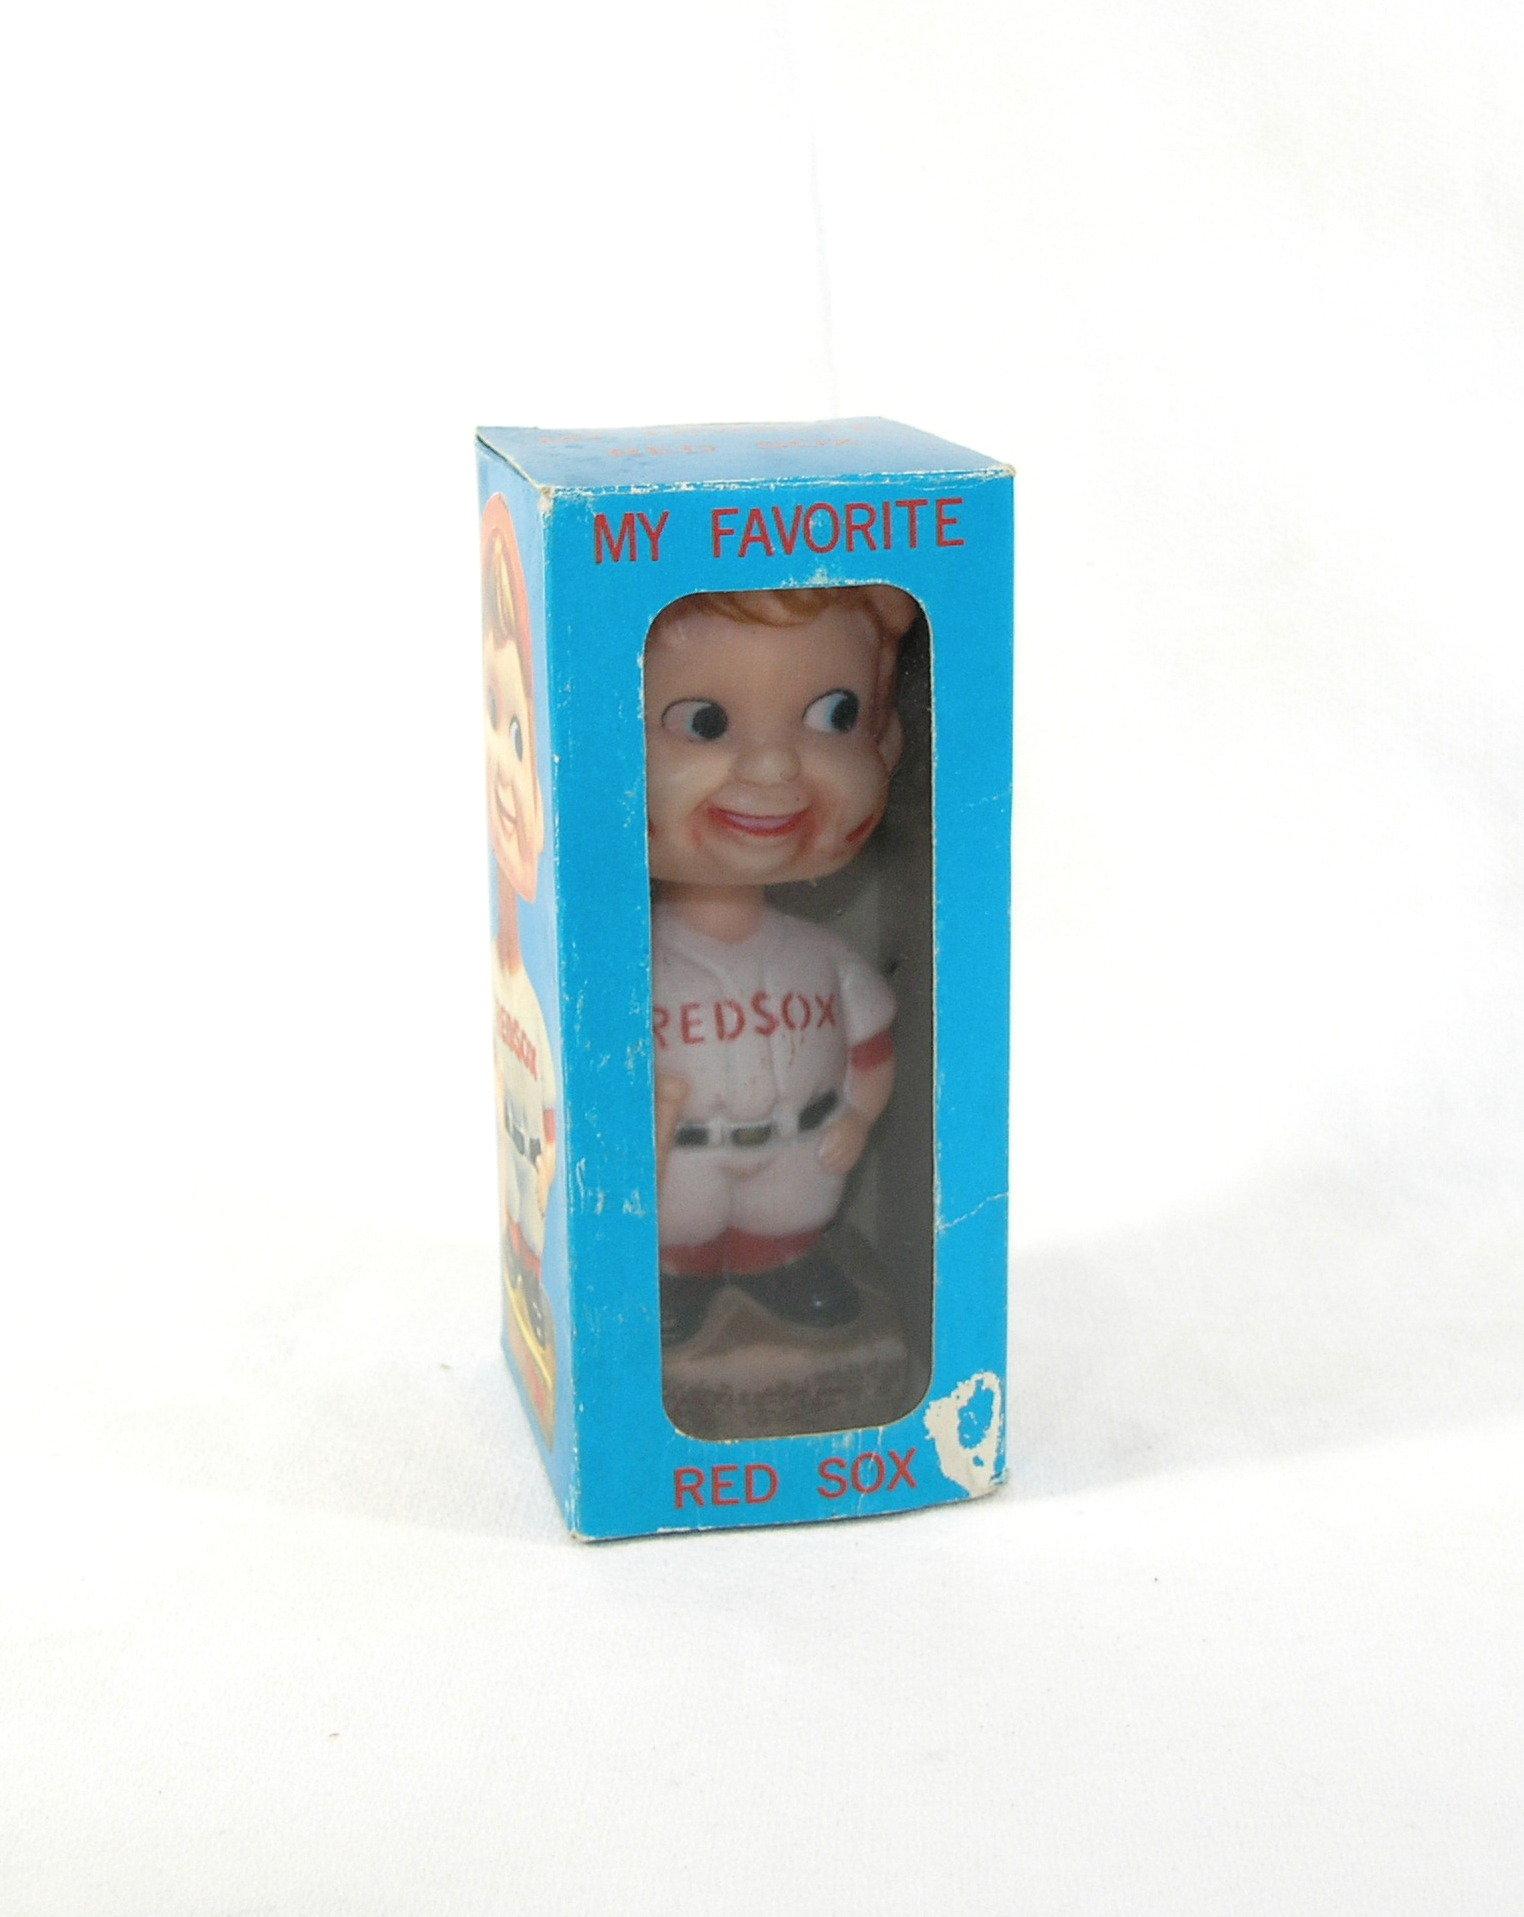 Late 1960s -1970s "My Favorite" Boston Red Sox Bobblehead with Box. Plastic